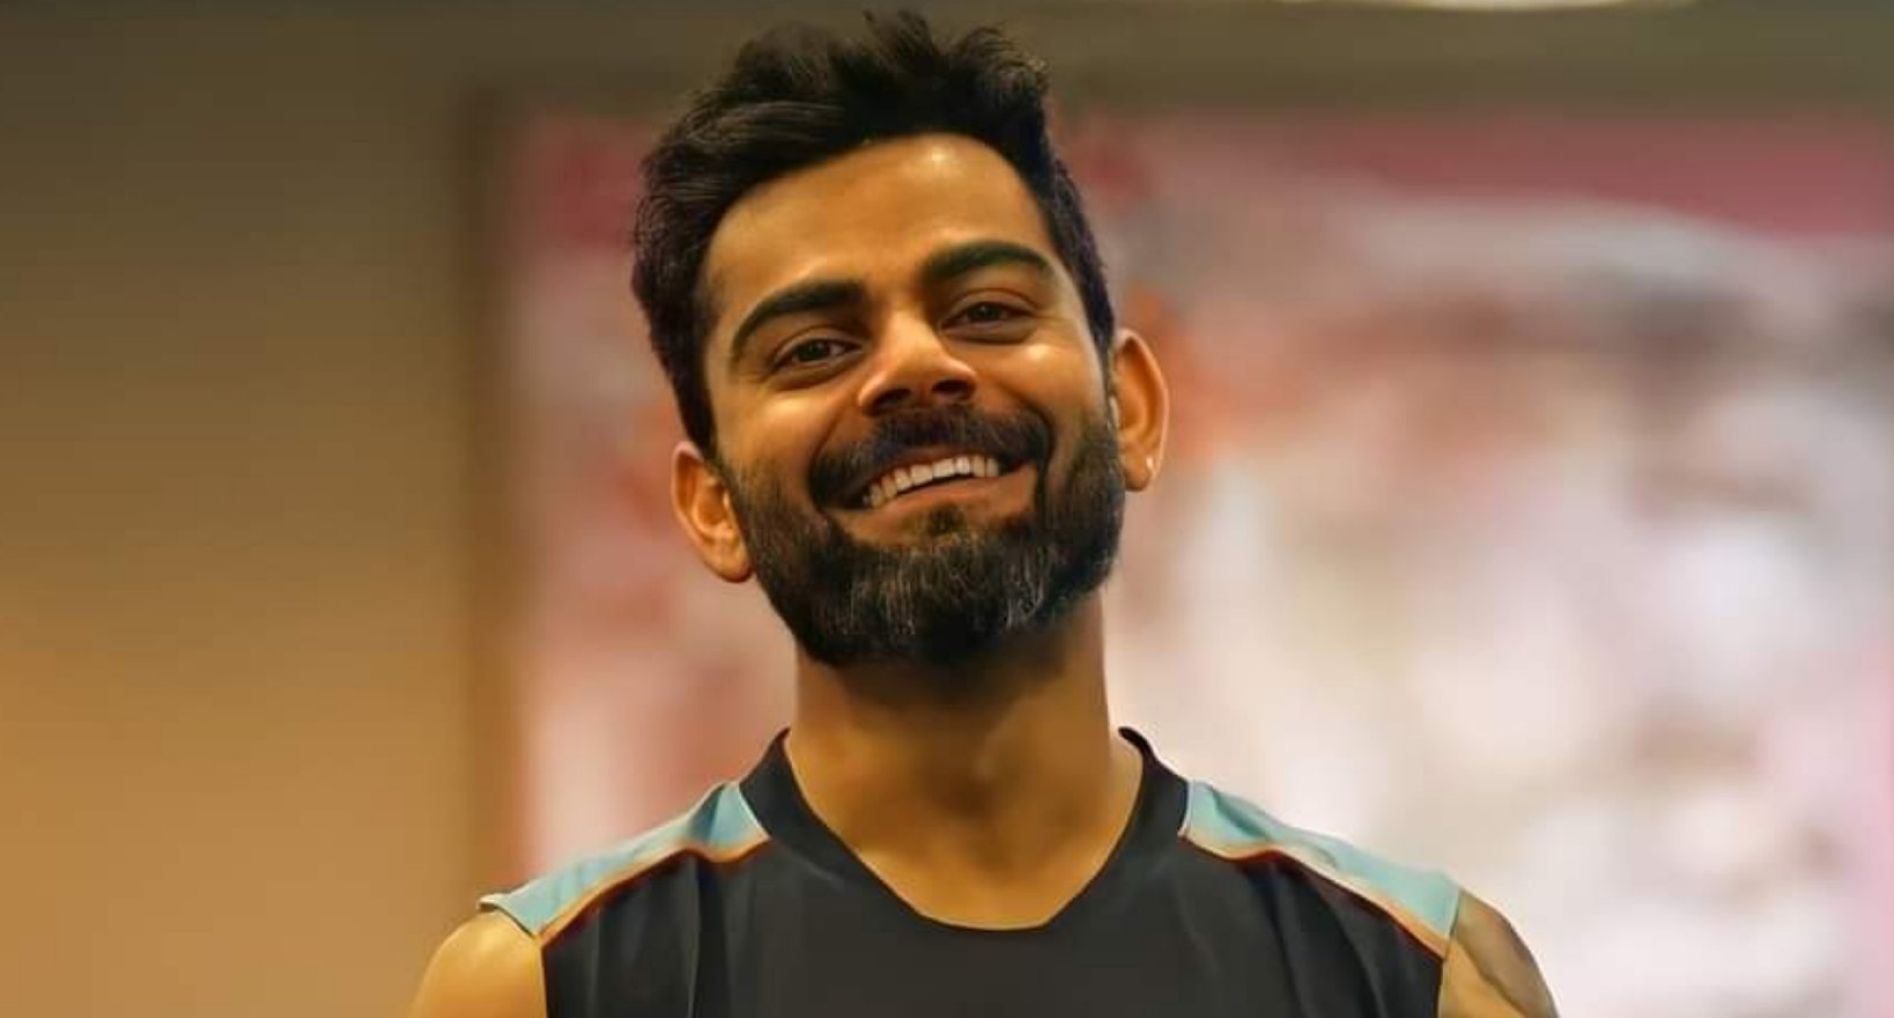 It’s difficult for players to stay motivated: Virat Kohli stresses on mental well being of players